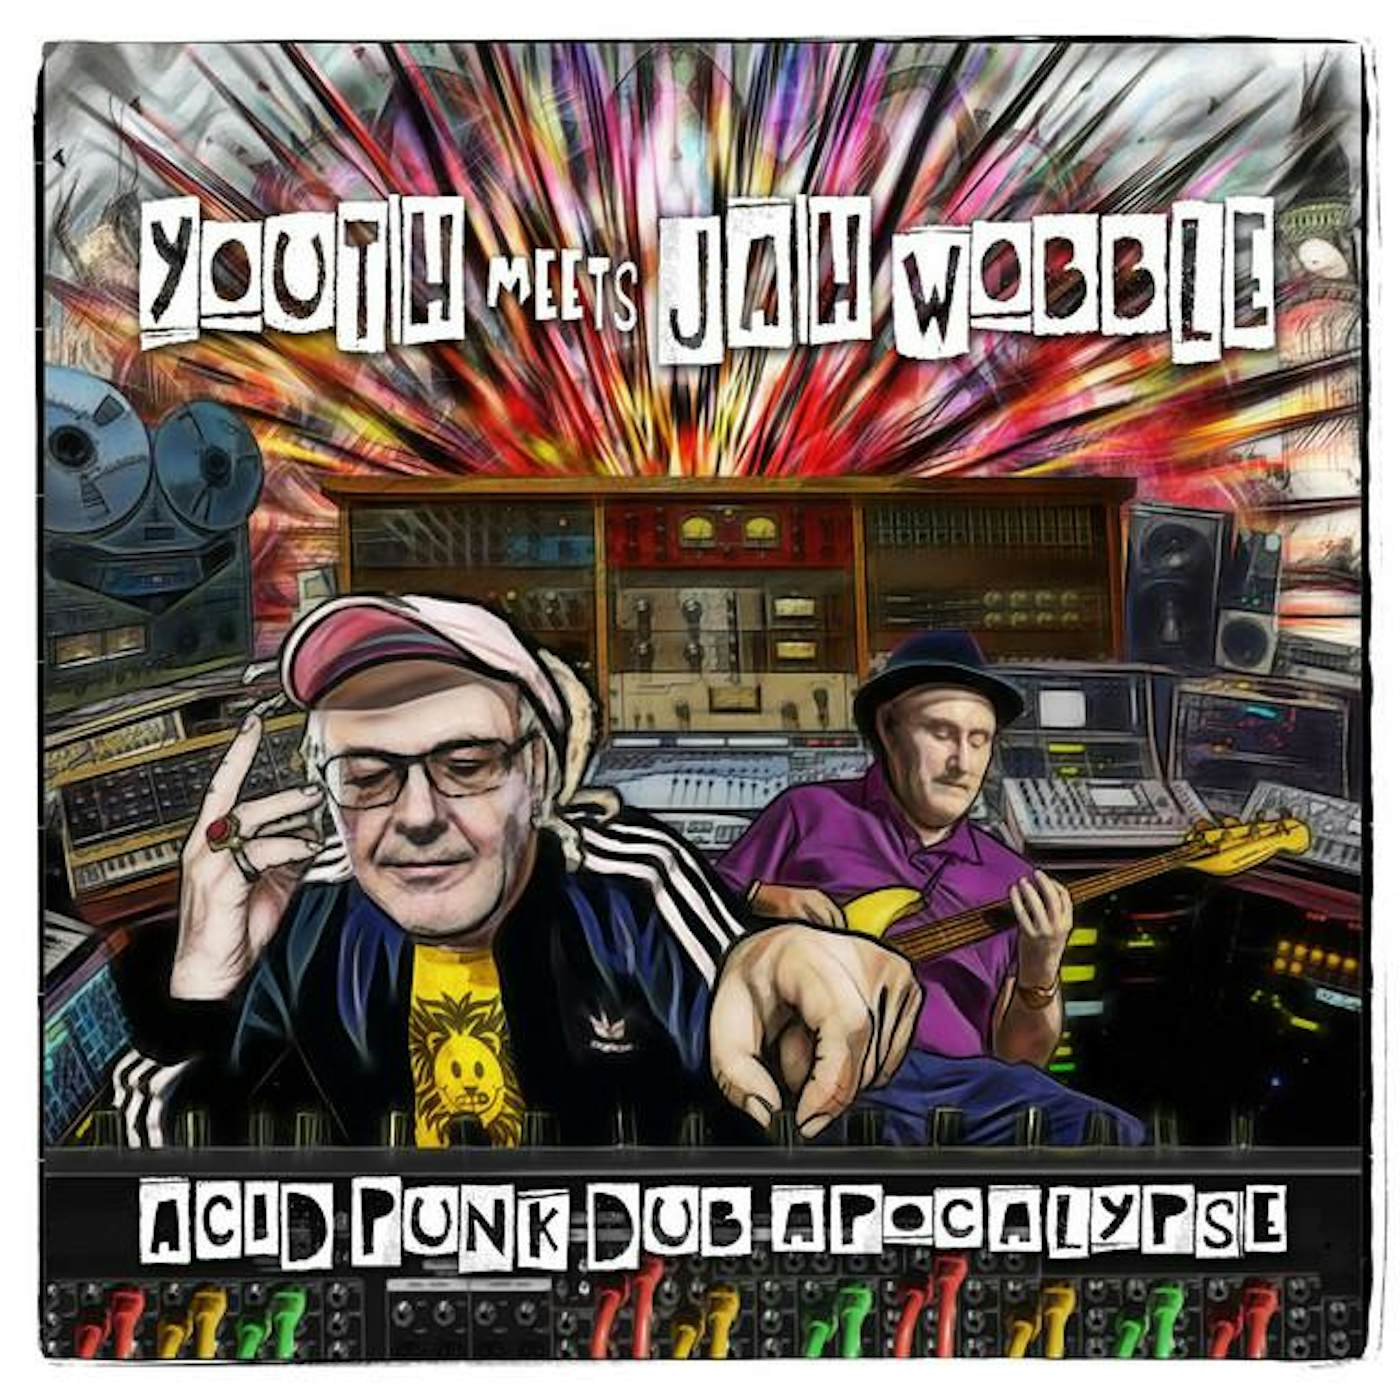 Youth Meets Jah Wobble